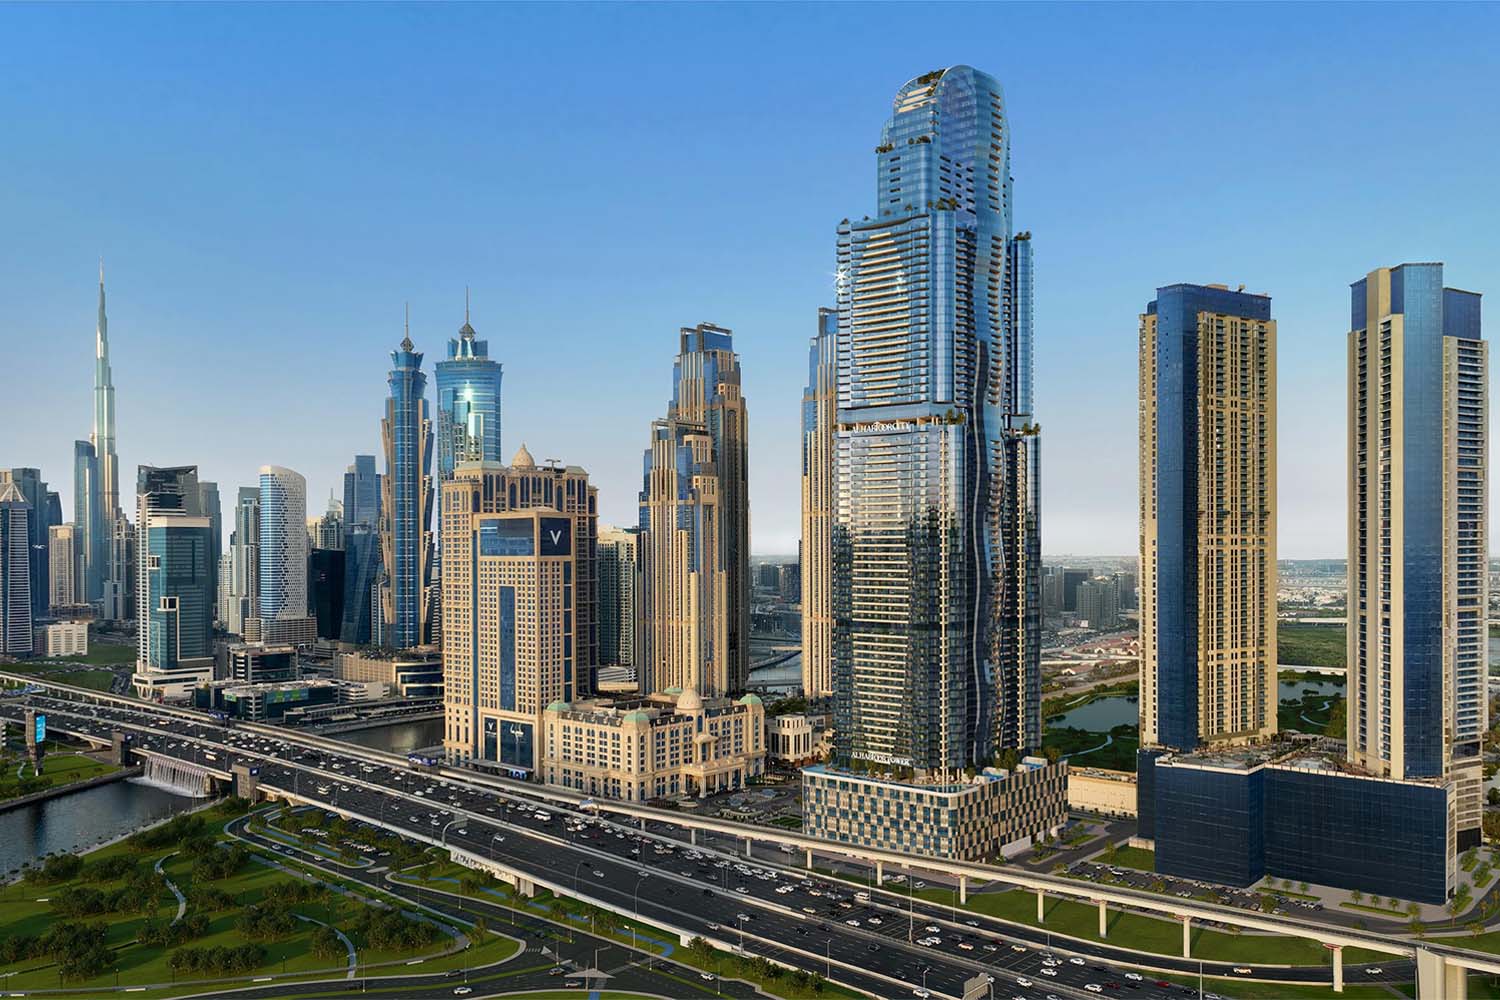 latest-project-in-dubai-al-habtoor-tower-for-sale-in-business-bay